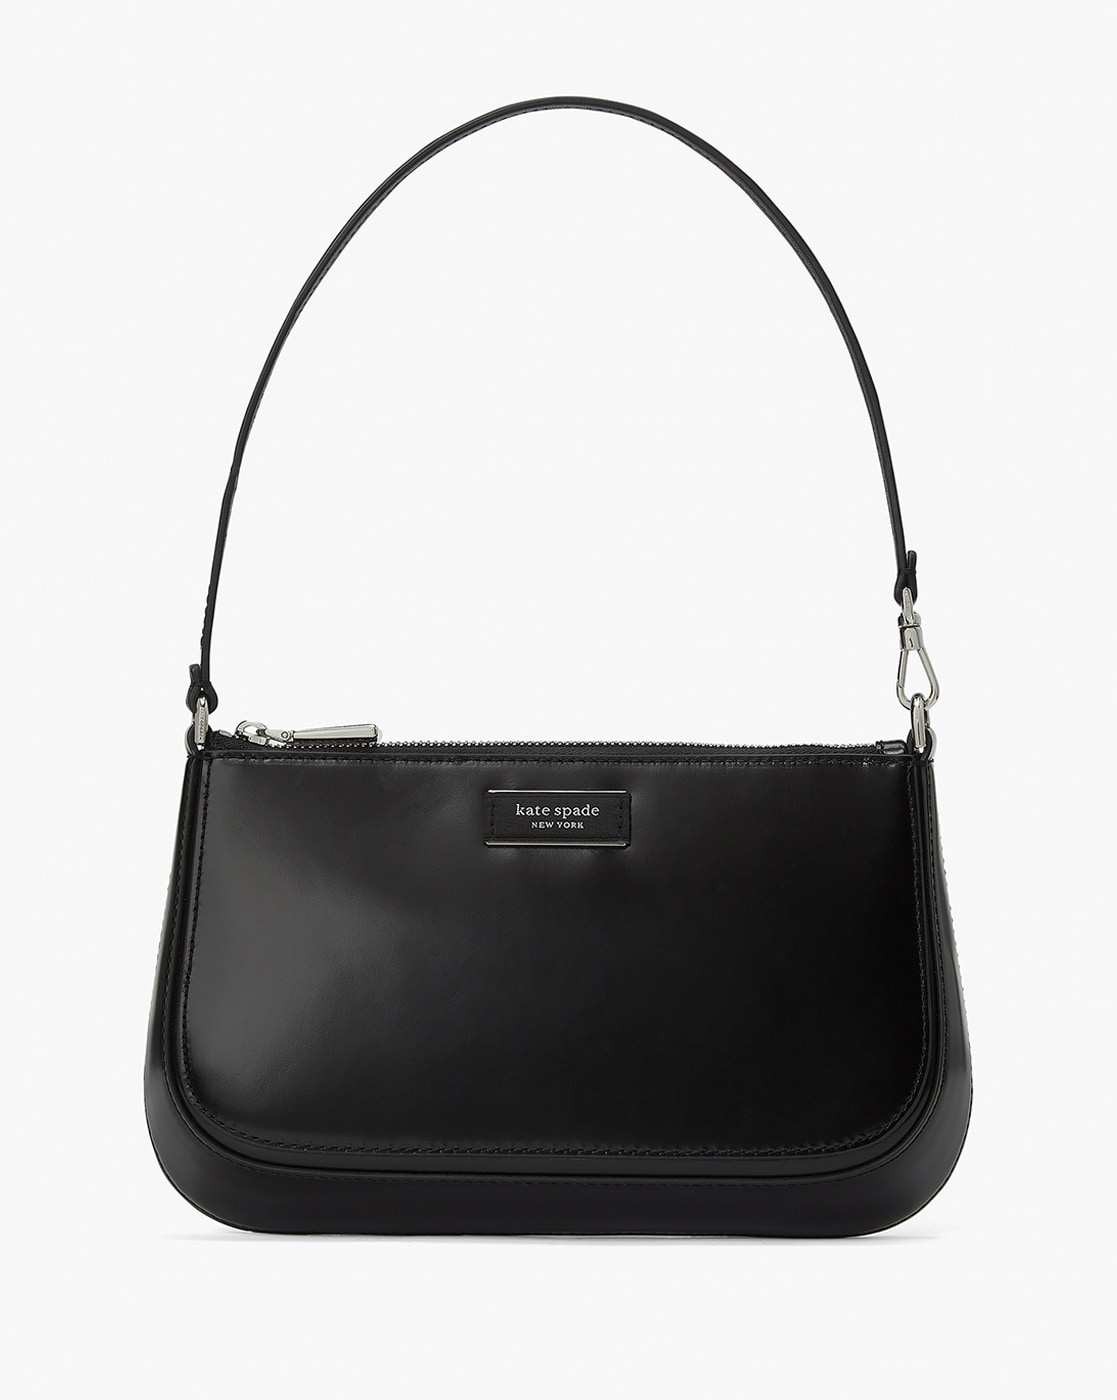 Leather Cleaner | Kate Spade New York | Leather conditioner, Leather  cleaning, Shoulder bag women